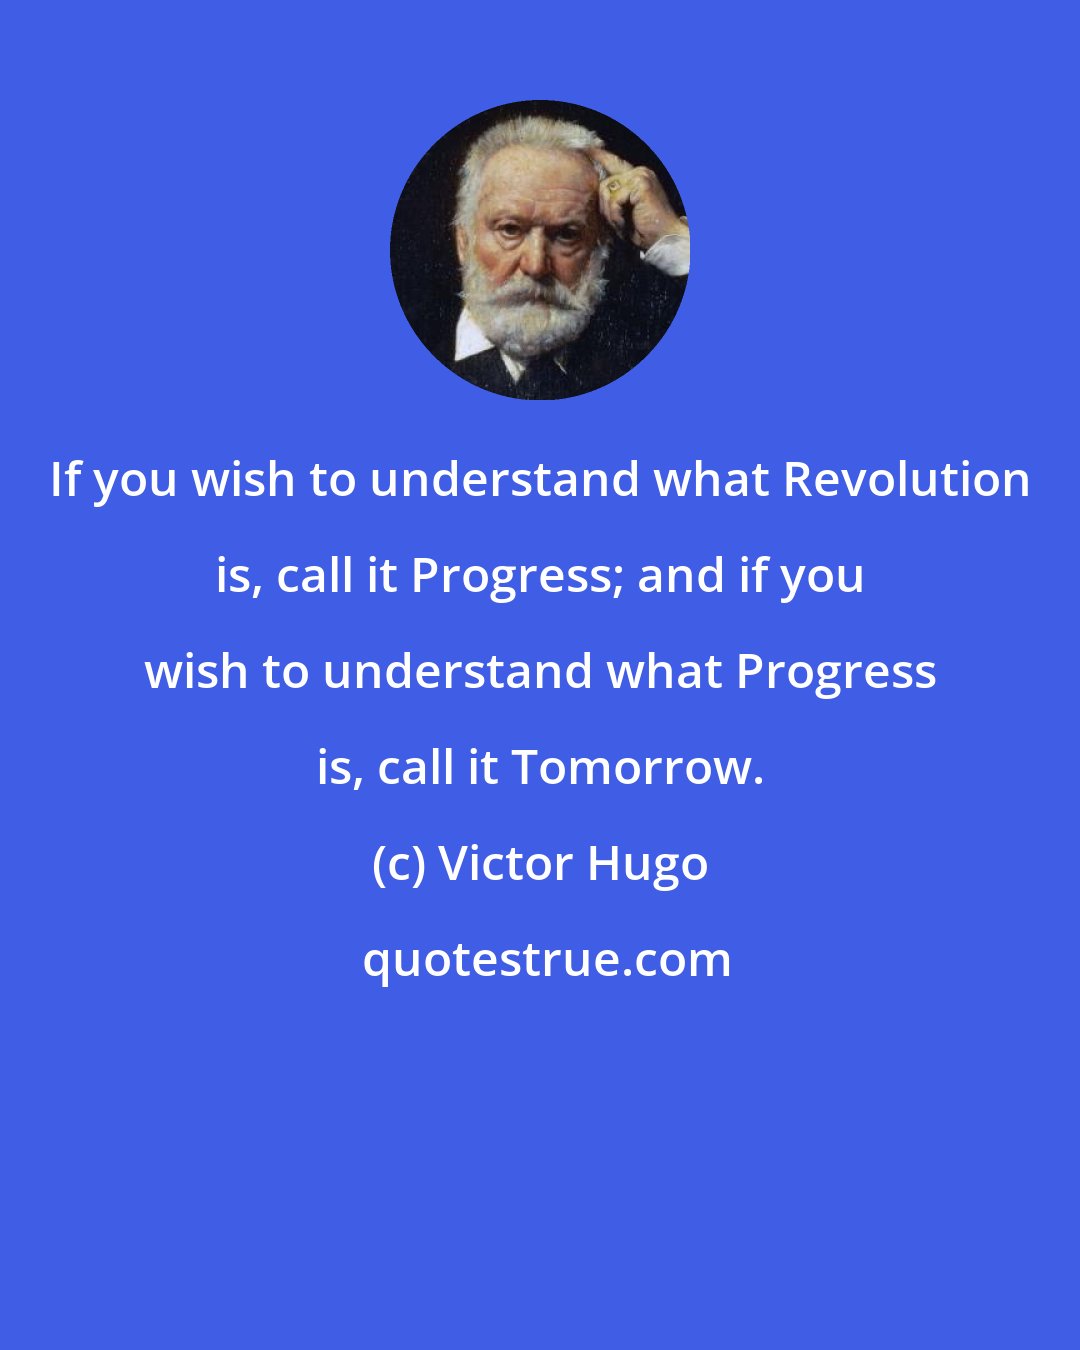 Victor Hugo: If you wish to understand what Revolution is, call it Progress; and if you wish to understand what Progress is, call it Tomorrow.